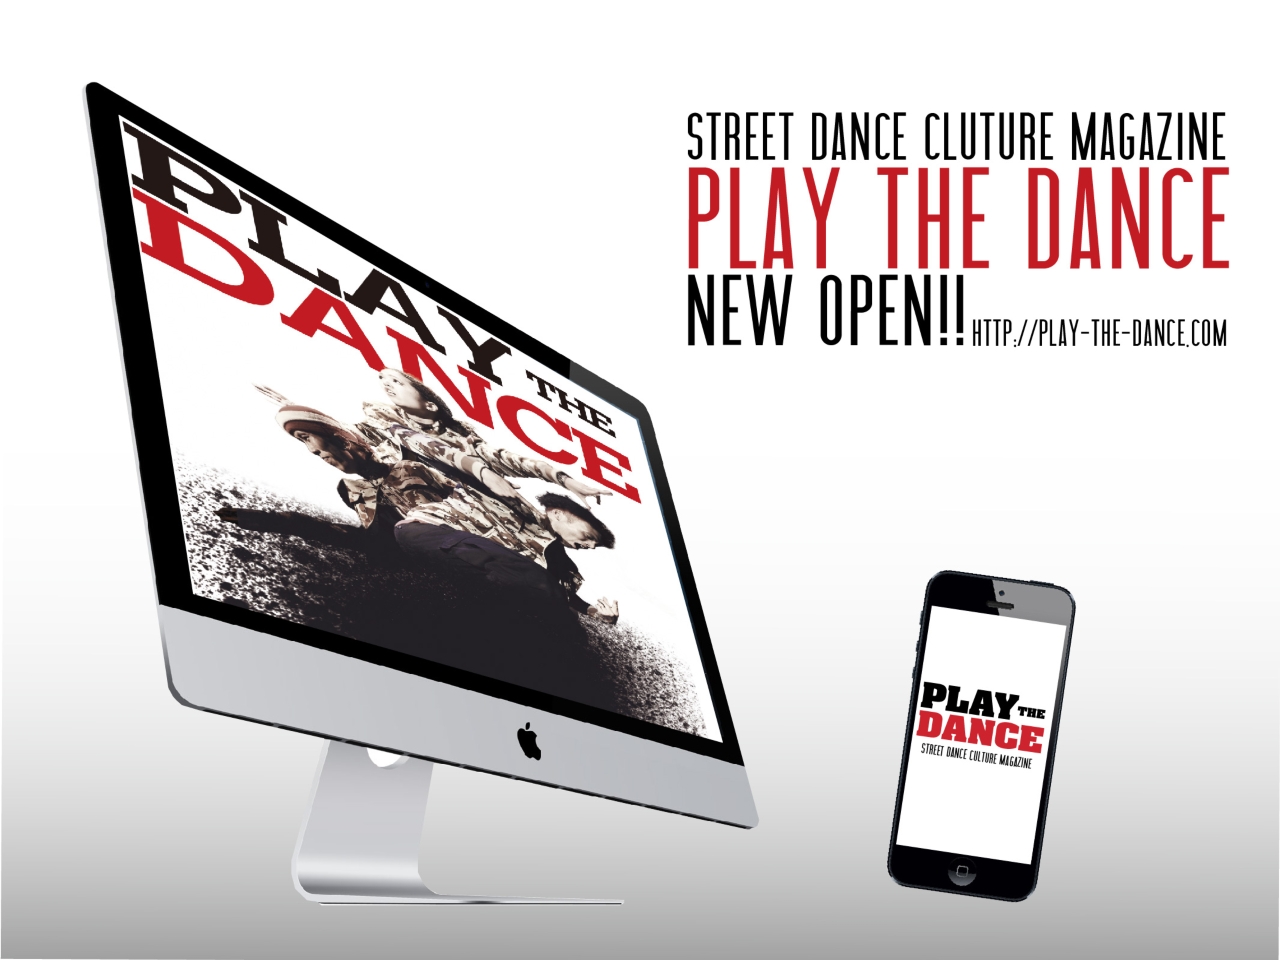 PLAY THE DANCE NEW OPEN!!